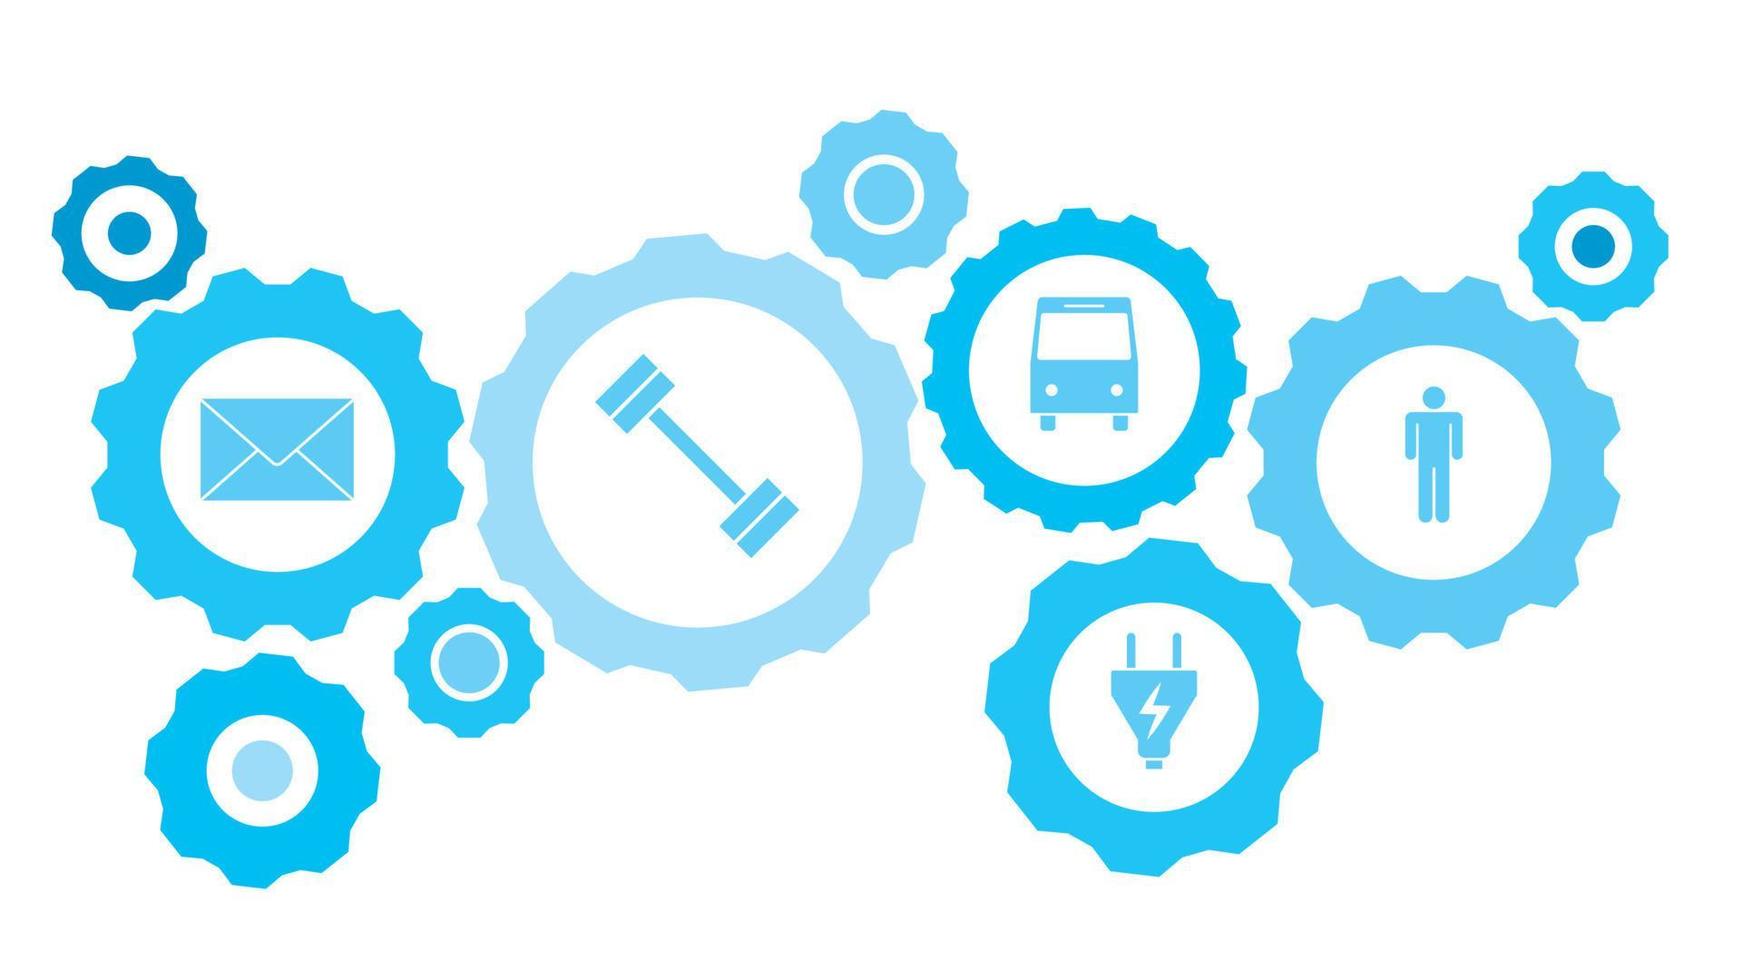 Man gear blue icon set. Abstract background with connected gears and icons for logistic, service, shipping, distribution, transport, market, communicate concepts vector